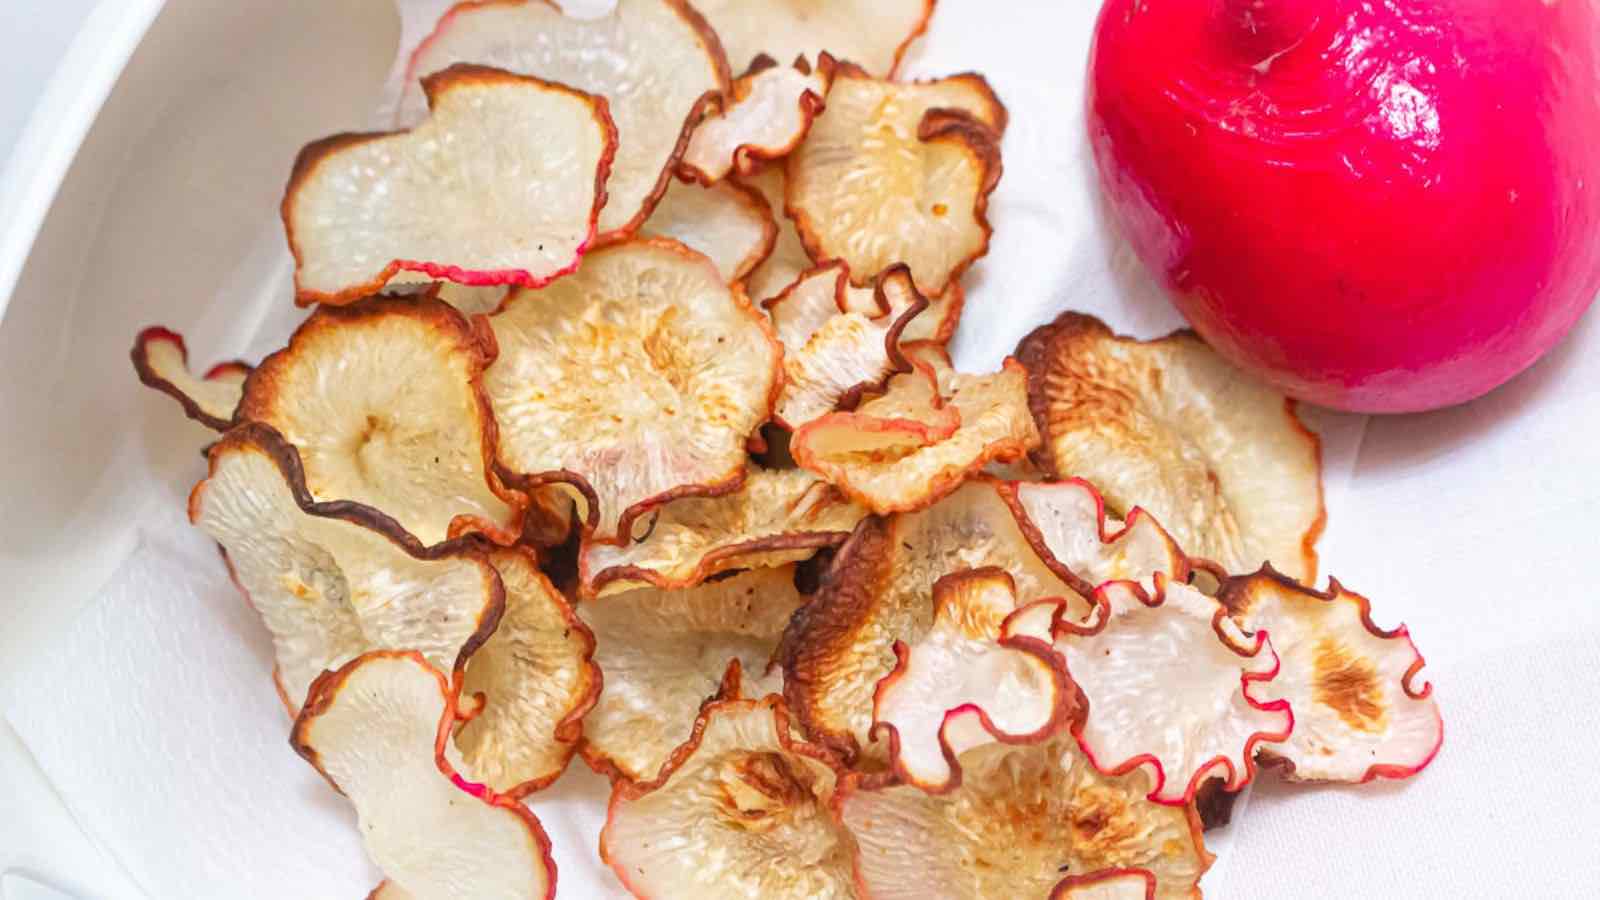 Oven Baked Radish Chips. Photo credit: Best Clean Eating.